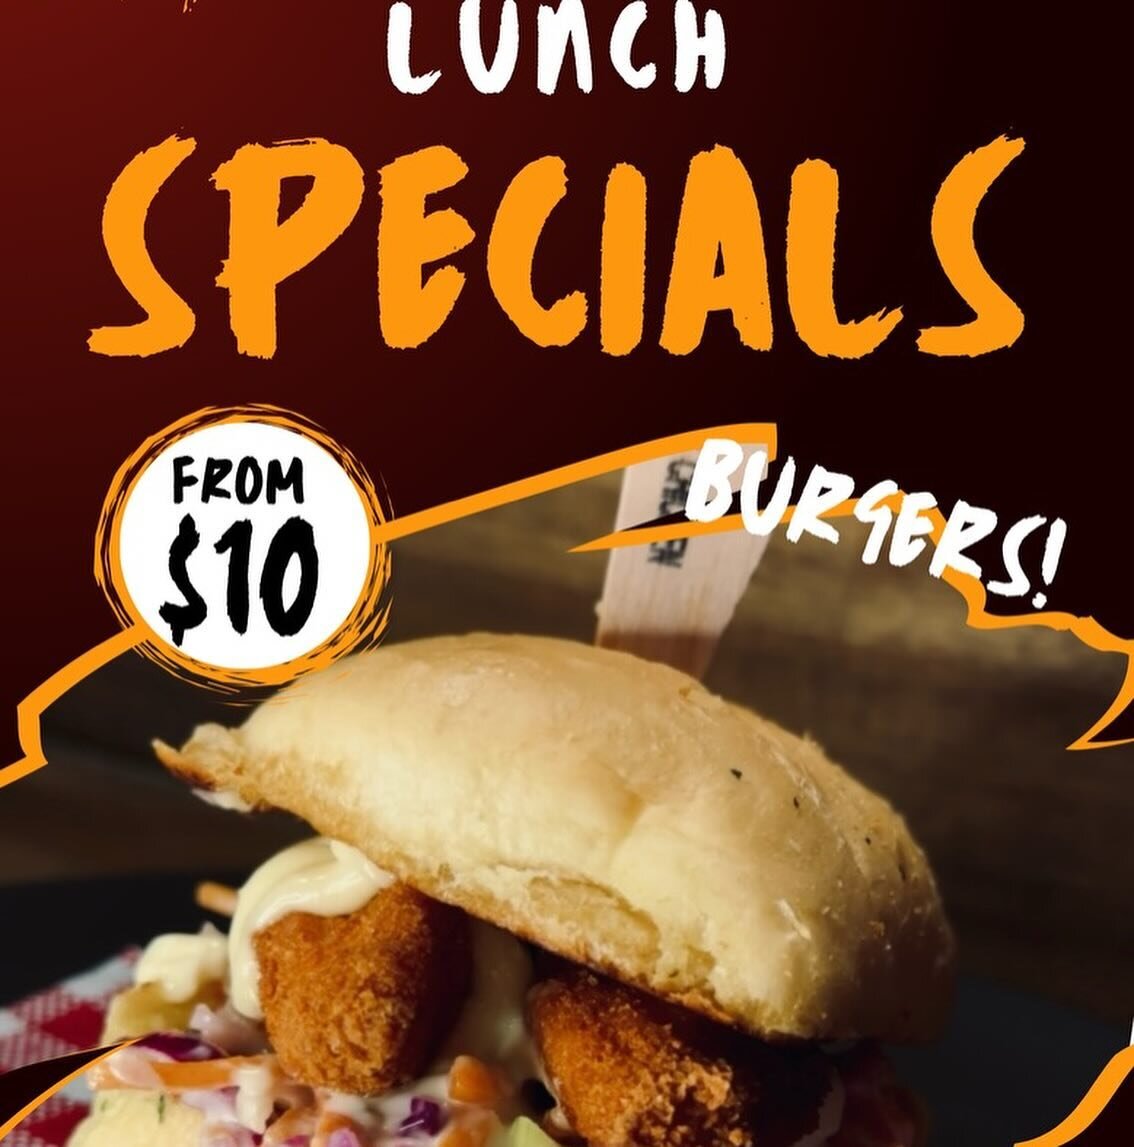 House made delicious burgers from $10 

🍔 Indulge in our house made absolutely delicious burger only a mouthwatering $10 special at Lunch !

Juicy patty or crispy chicken tenders, melted cheese, caramelised onions, crisp slaw all nestled between sof